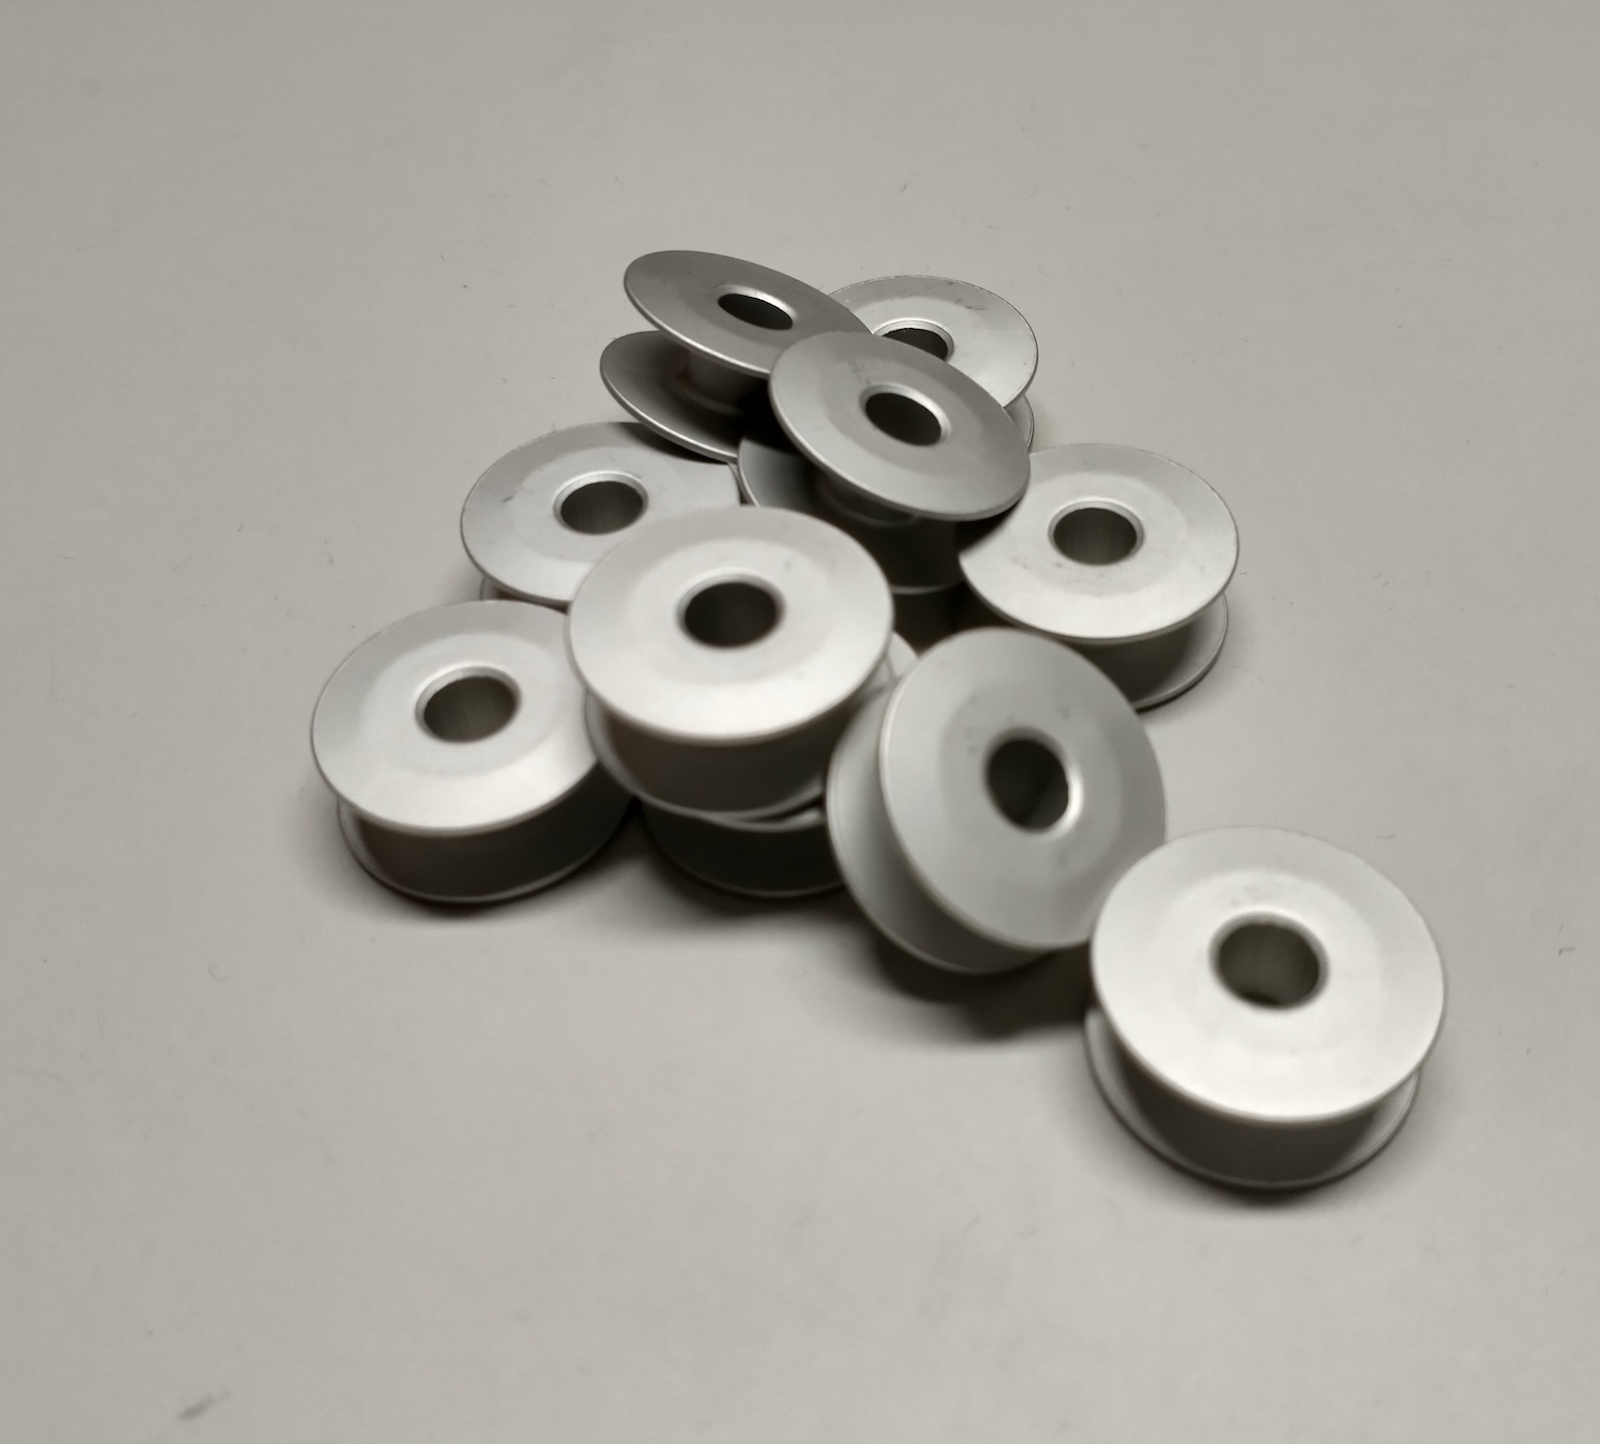 L-size bobbins for industrial Sewing Machines